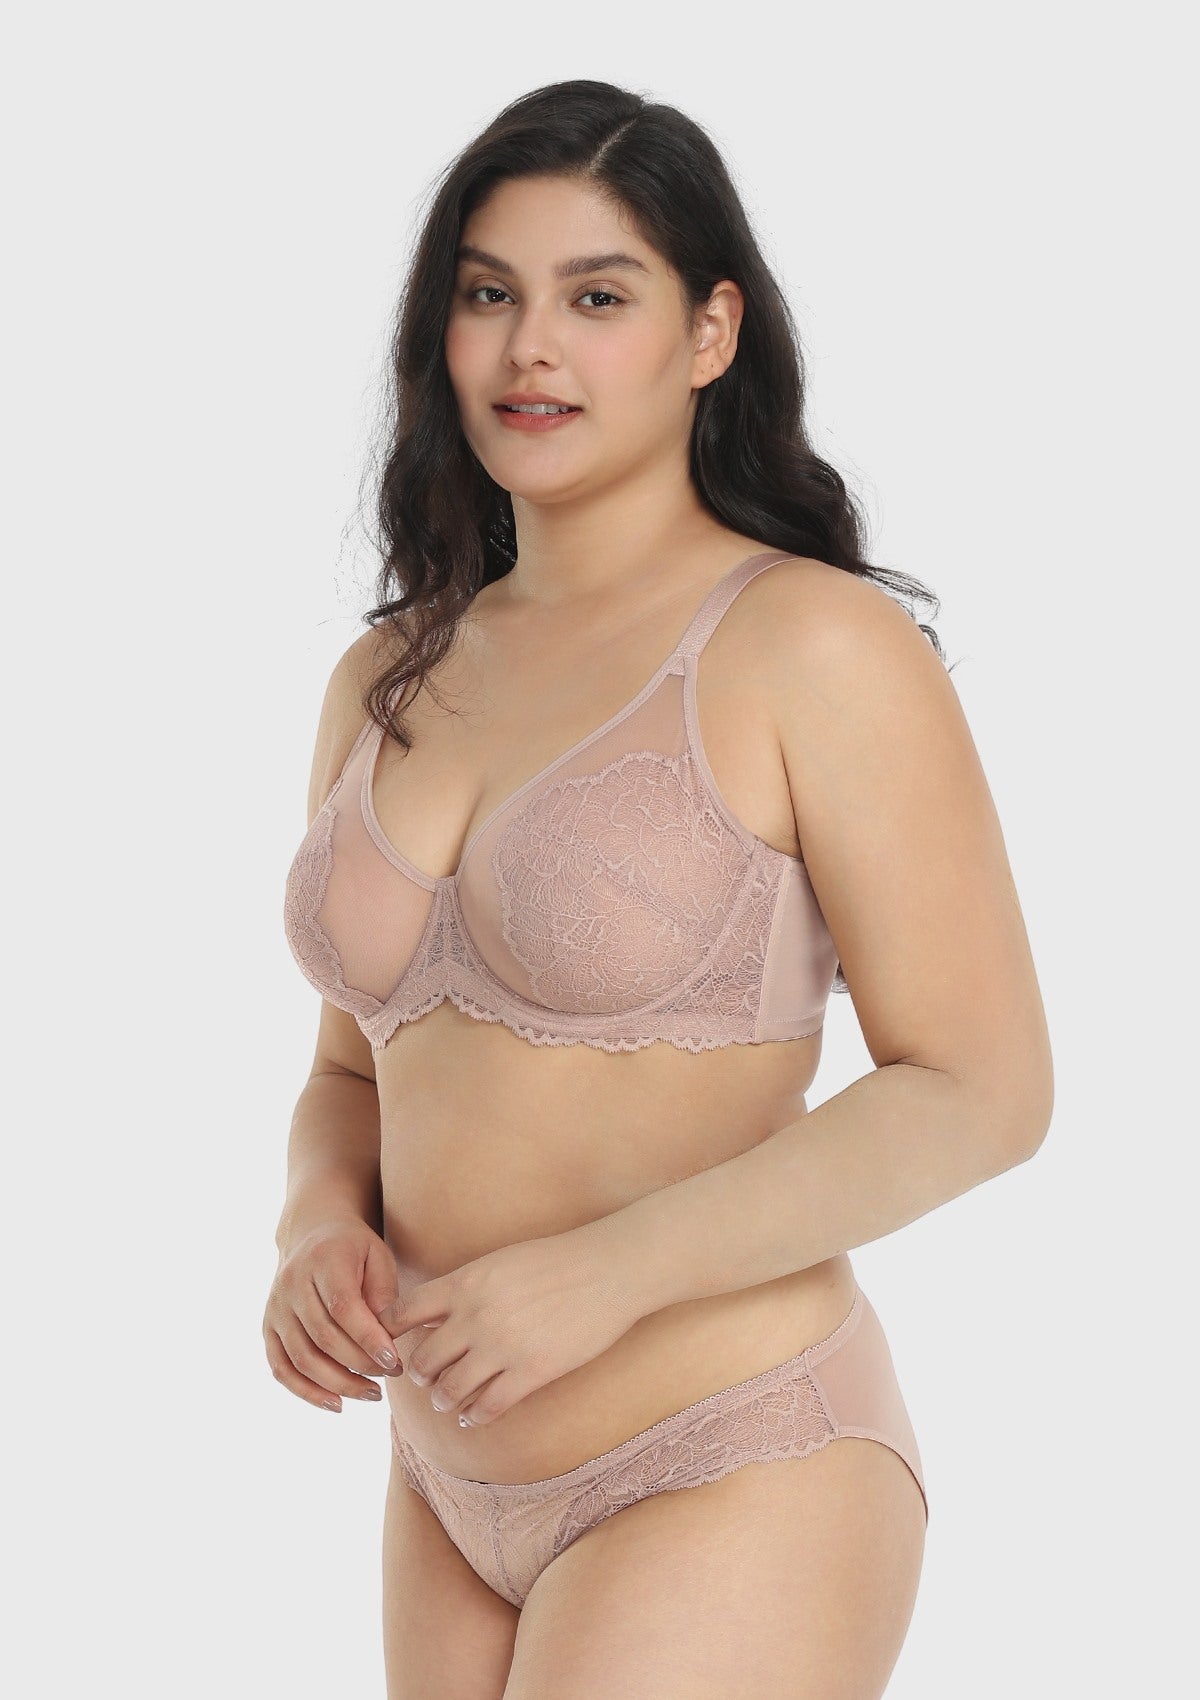 HSIA Blossom Plus Size Lace Bra - Wired, Unpadded, See-Through - Dark Pink / 42 / DD/E